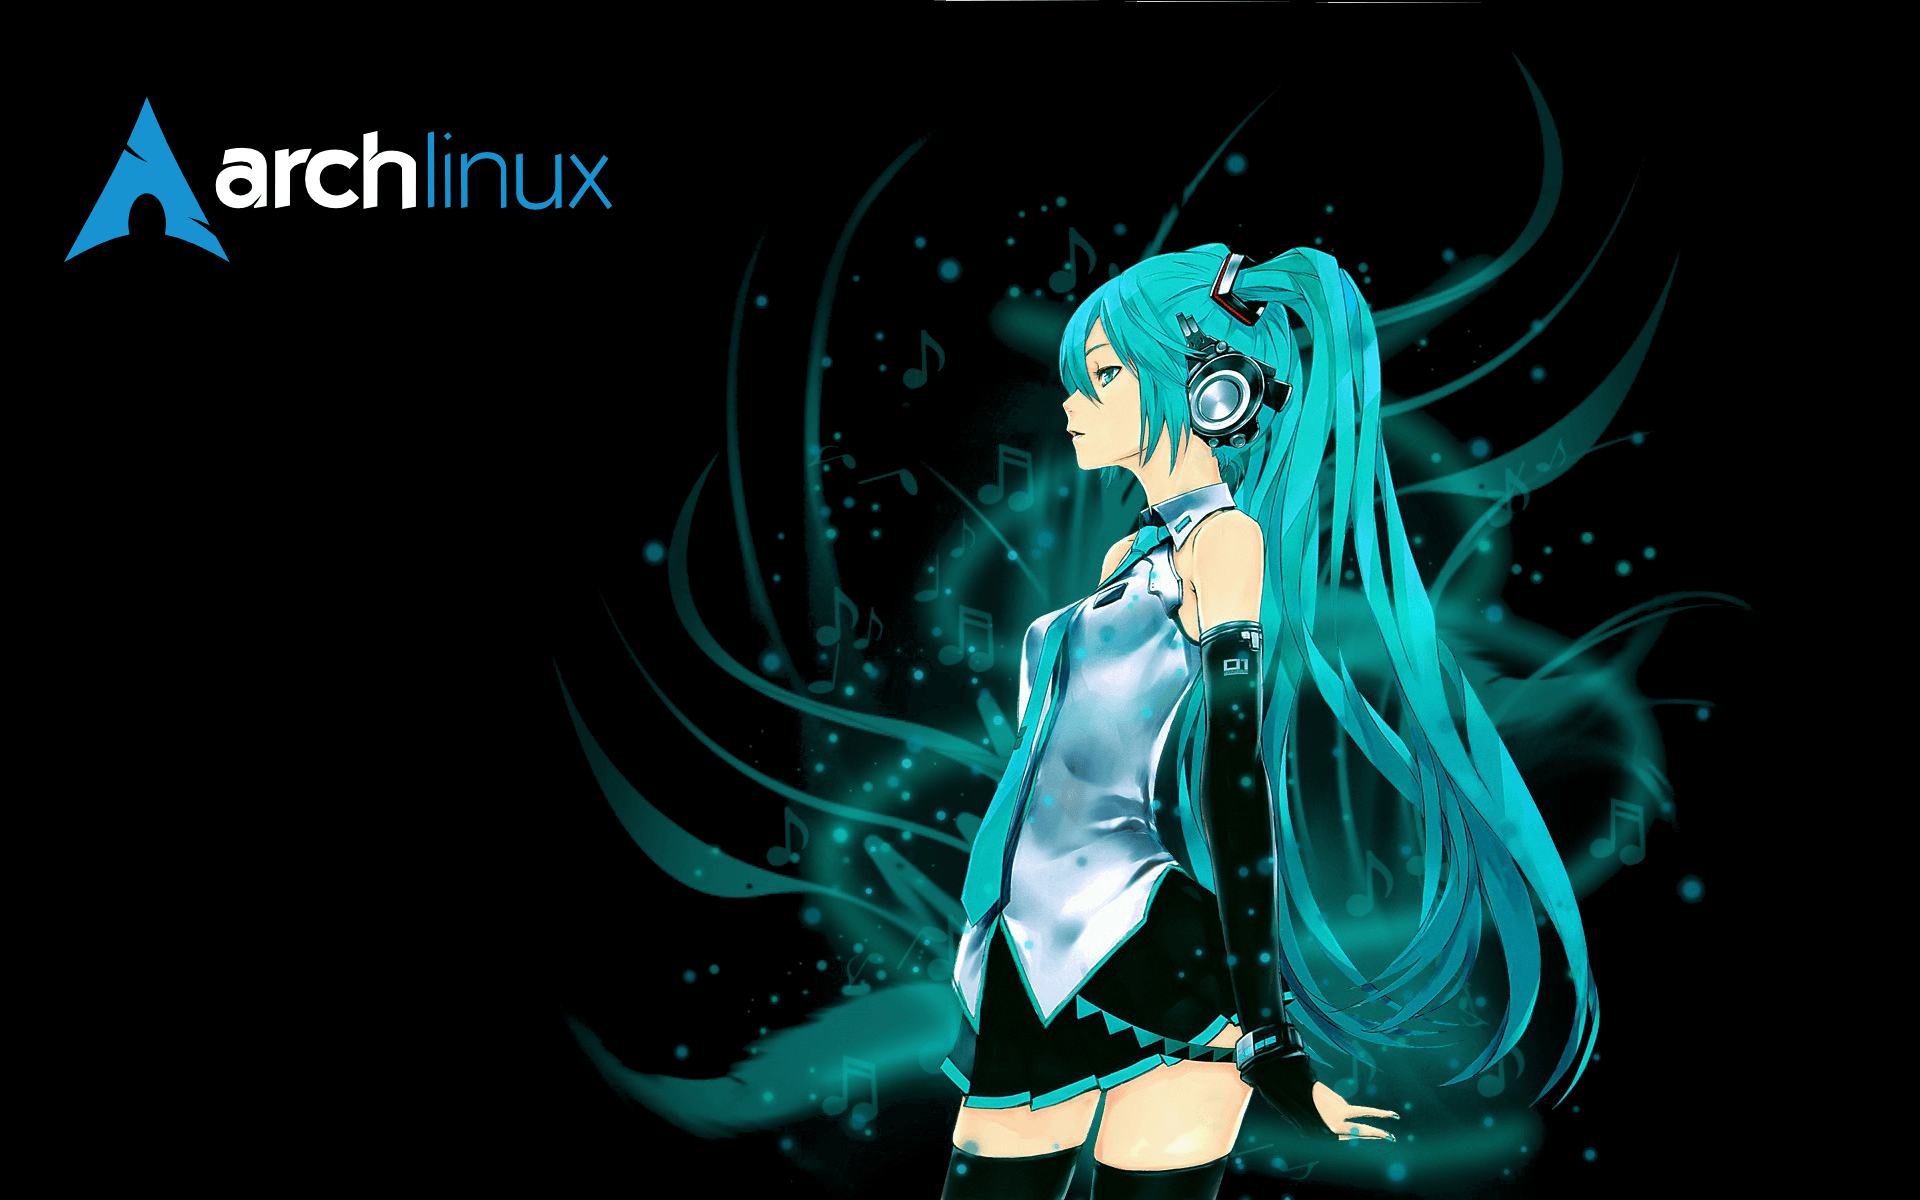 Wallpaper for the arch linux anime fans out there (if there are any)